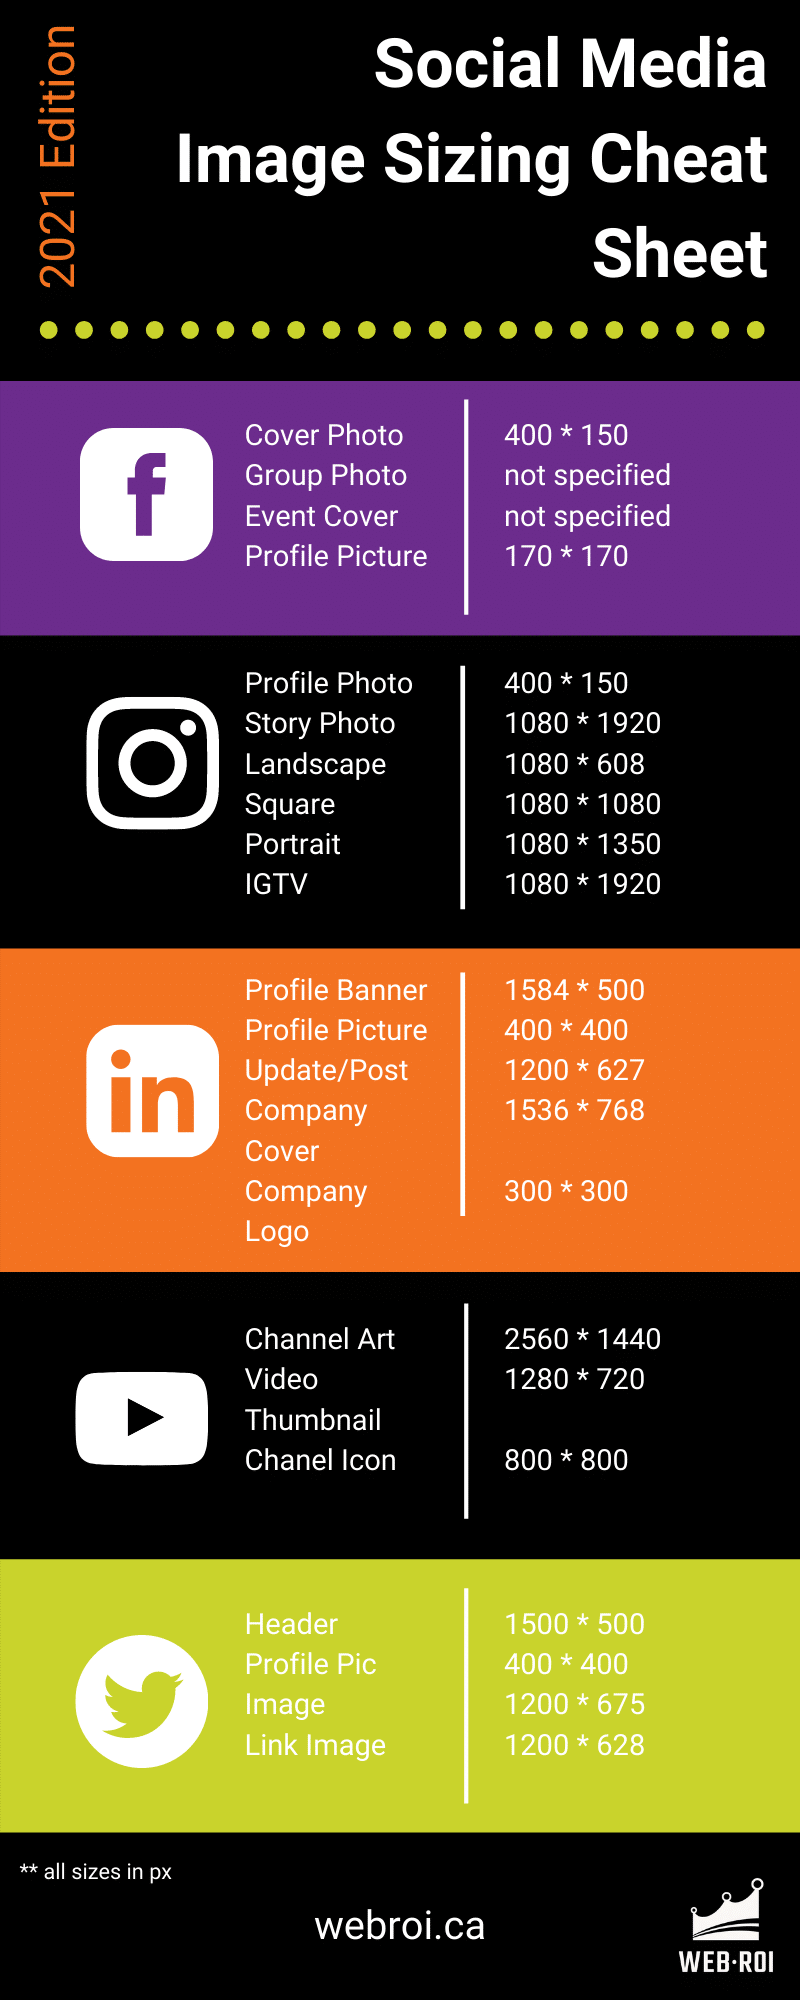 social media sizing for images cheat sheet 2021 